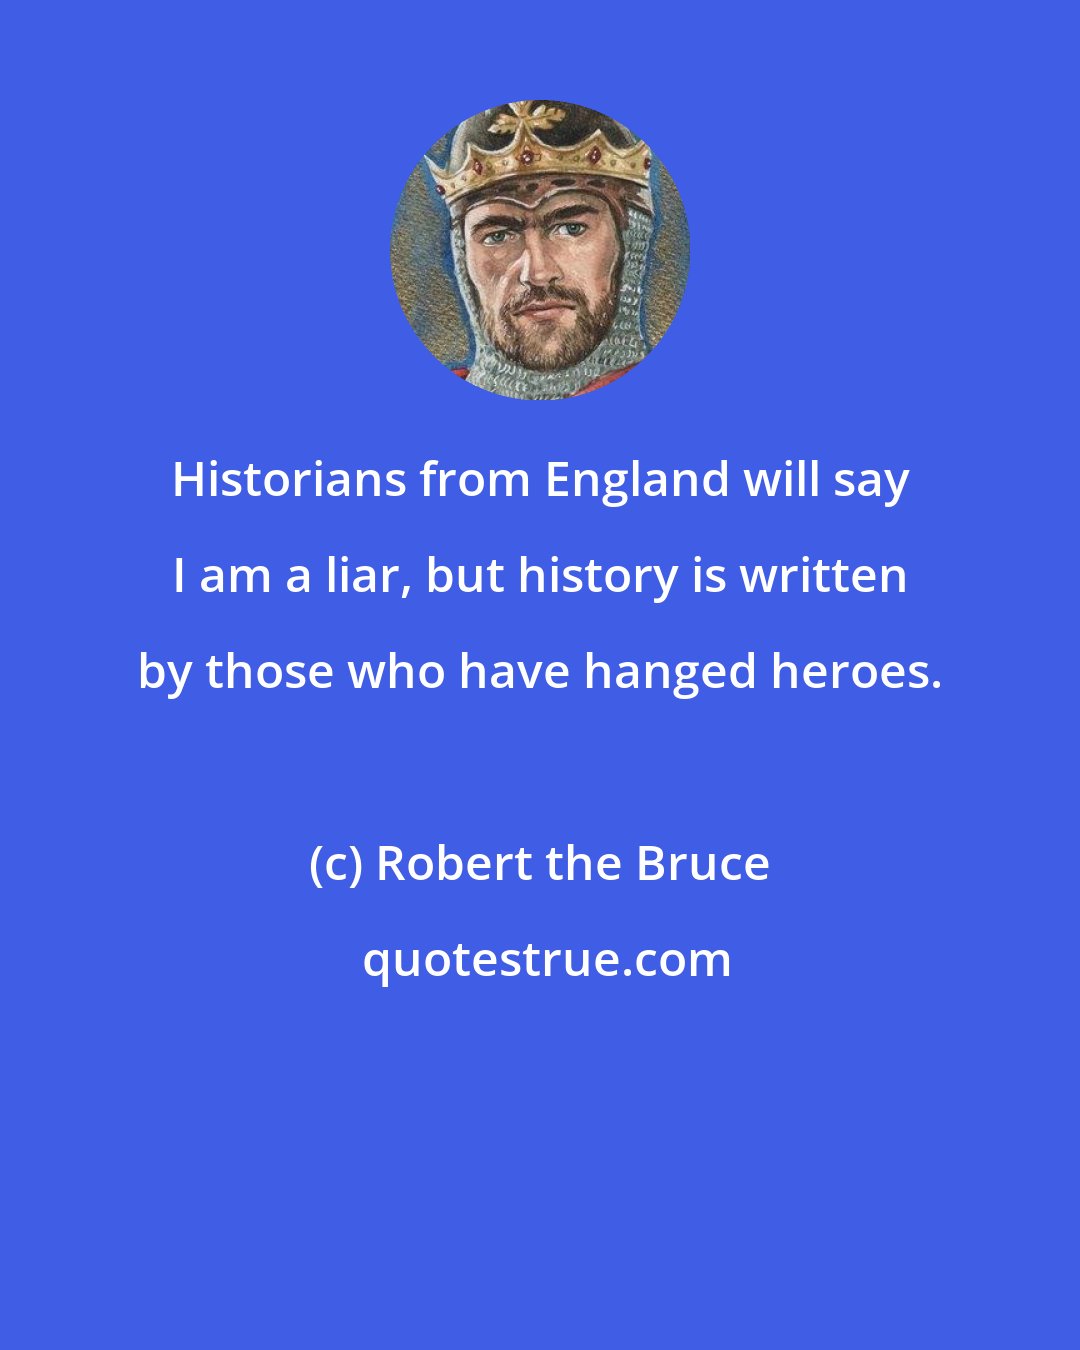 Robert the Bruce: Historians from England will say I am a liar, but history is written by those who have hanged heroes.